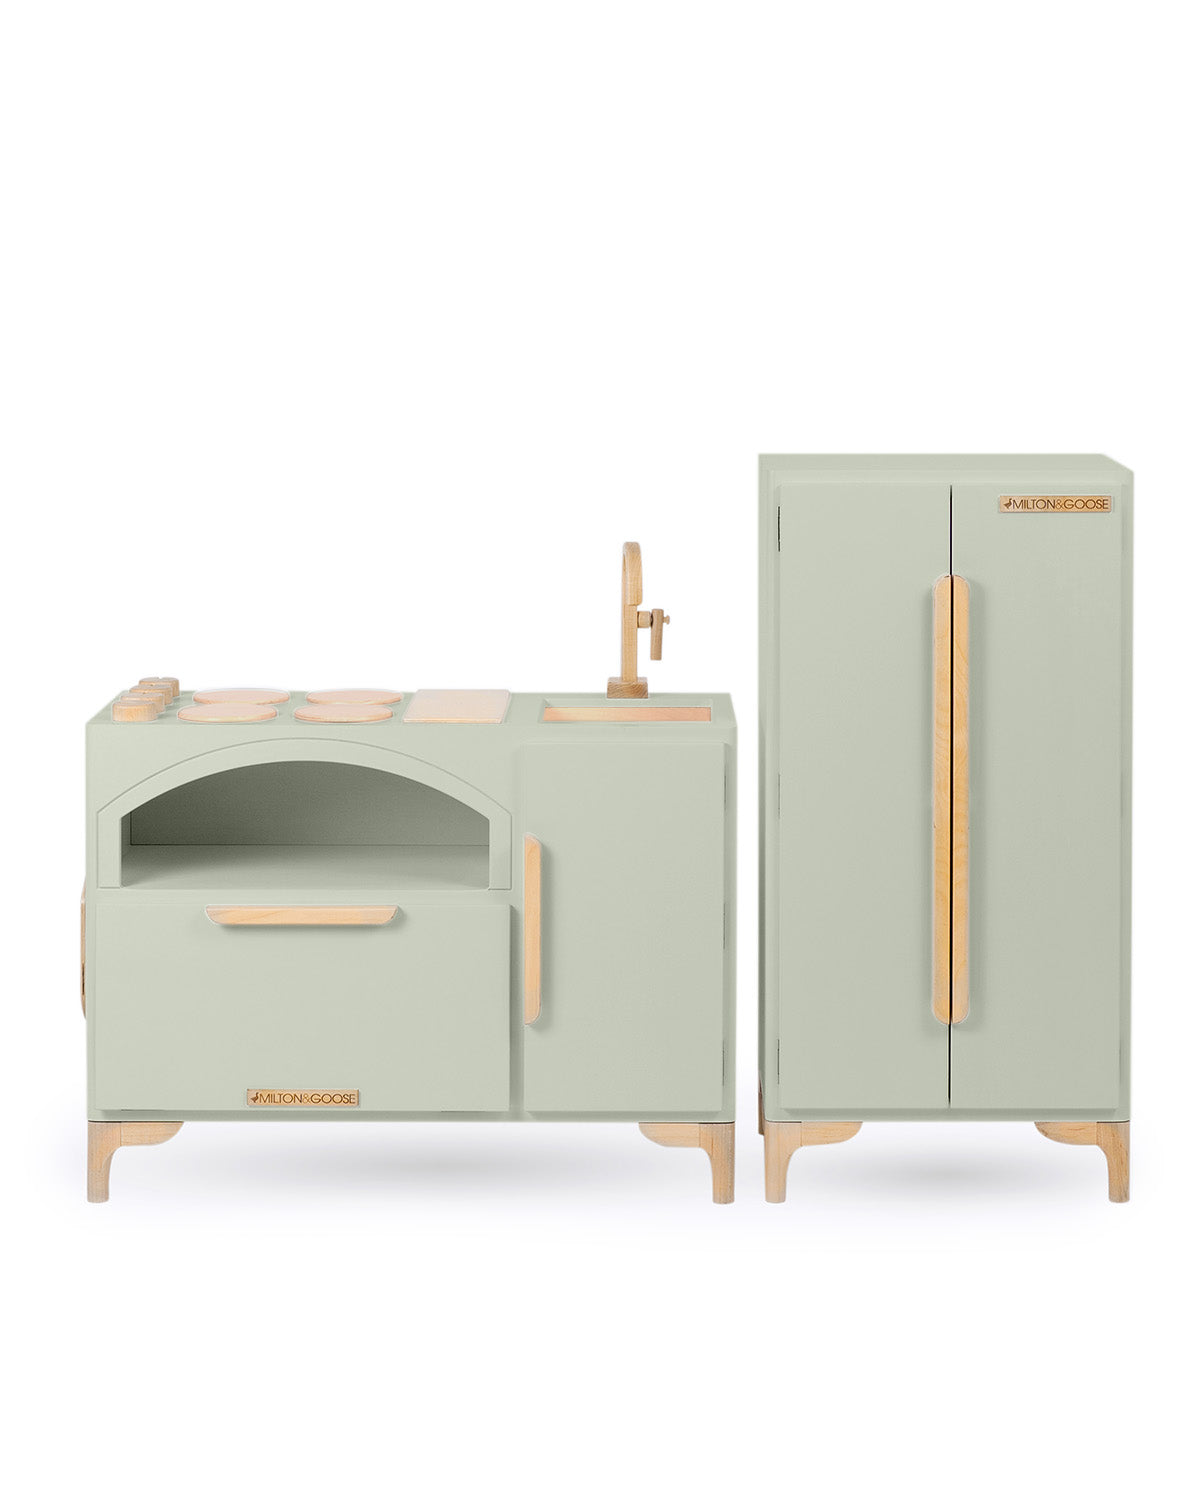 Milton & Goose Luca Play Kitchen collection in light sage. This 2-piece collection includes the Play Kitchen with pizza paddle and play refrigerator.